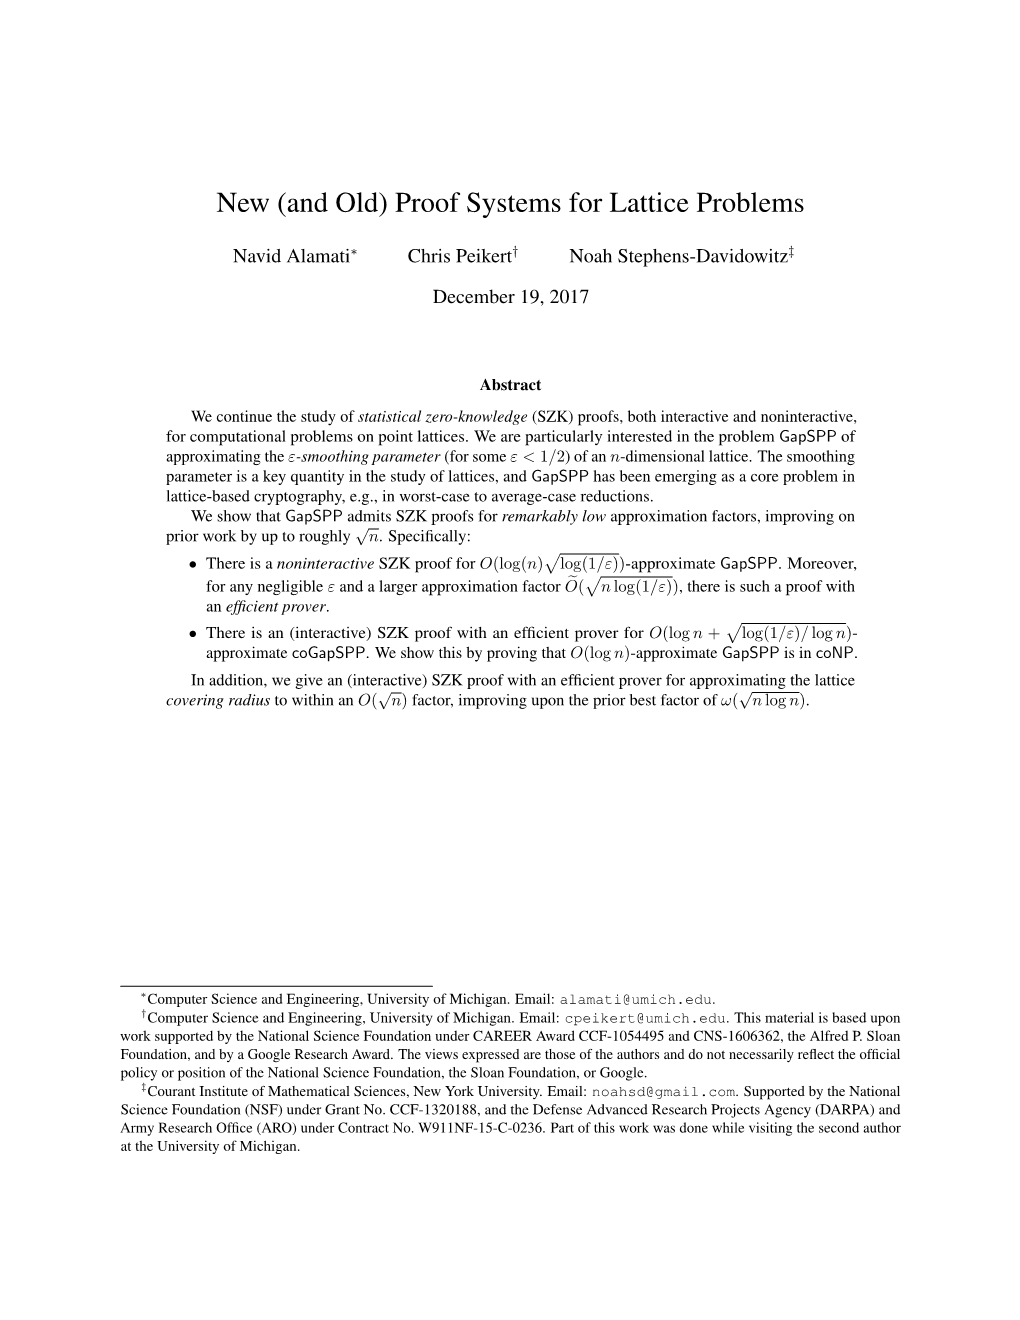 Proof Systems for Lattice Problems